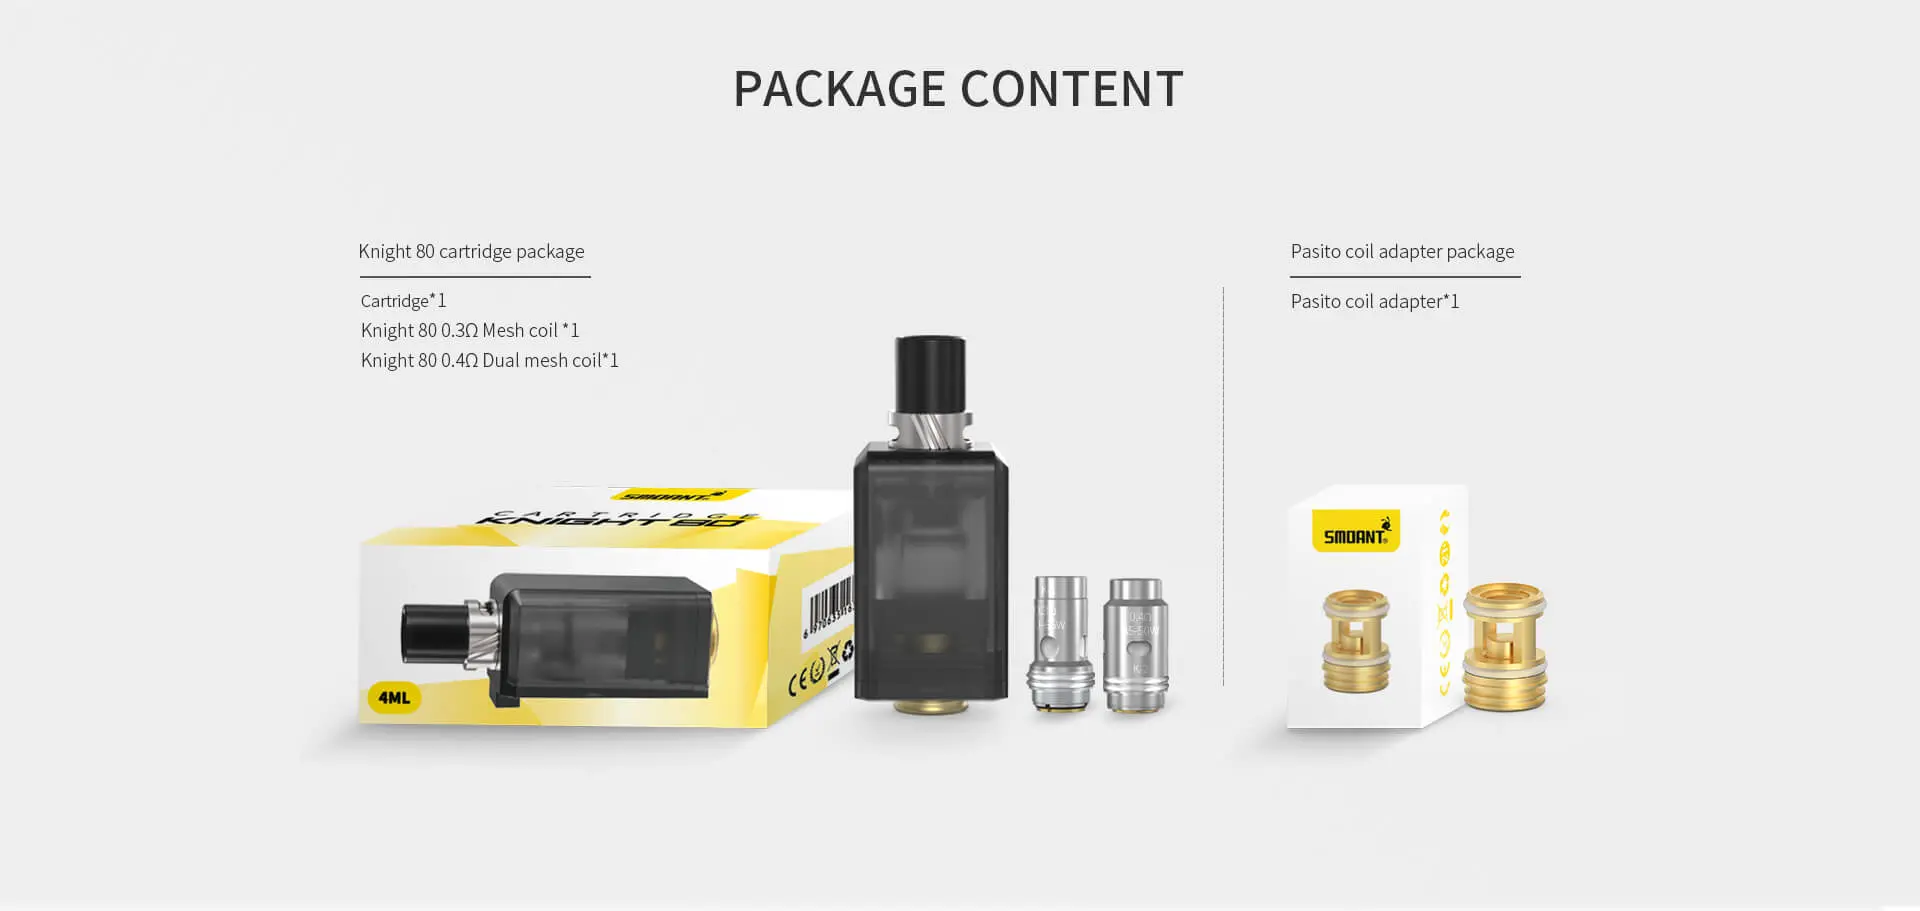 smaont knight 80 PACKAGE CONTENT